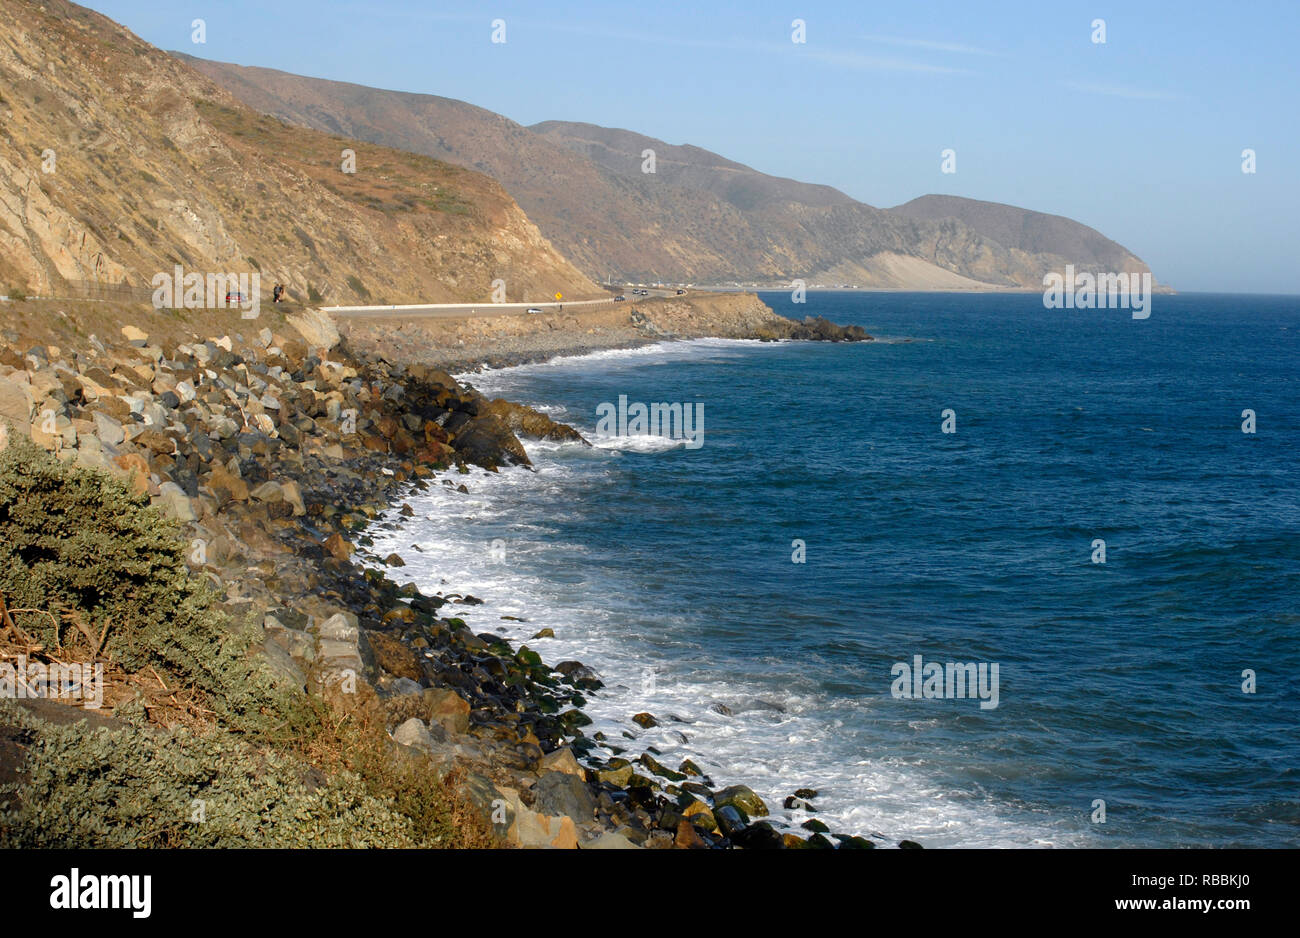 The rugged Pacific Ocean coastline along the Pacific Coast Highway is pictured at Point Mugu, California, located between Oxnard and Malibu. Stock Photo